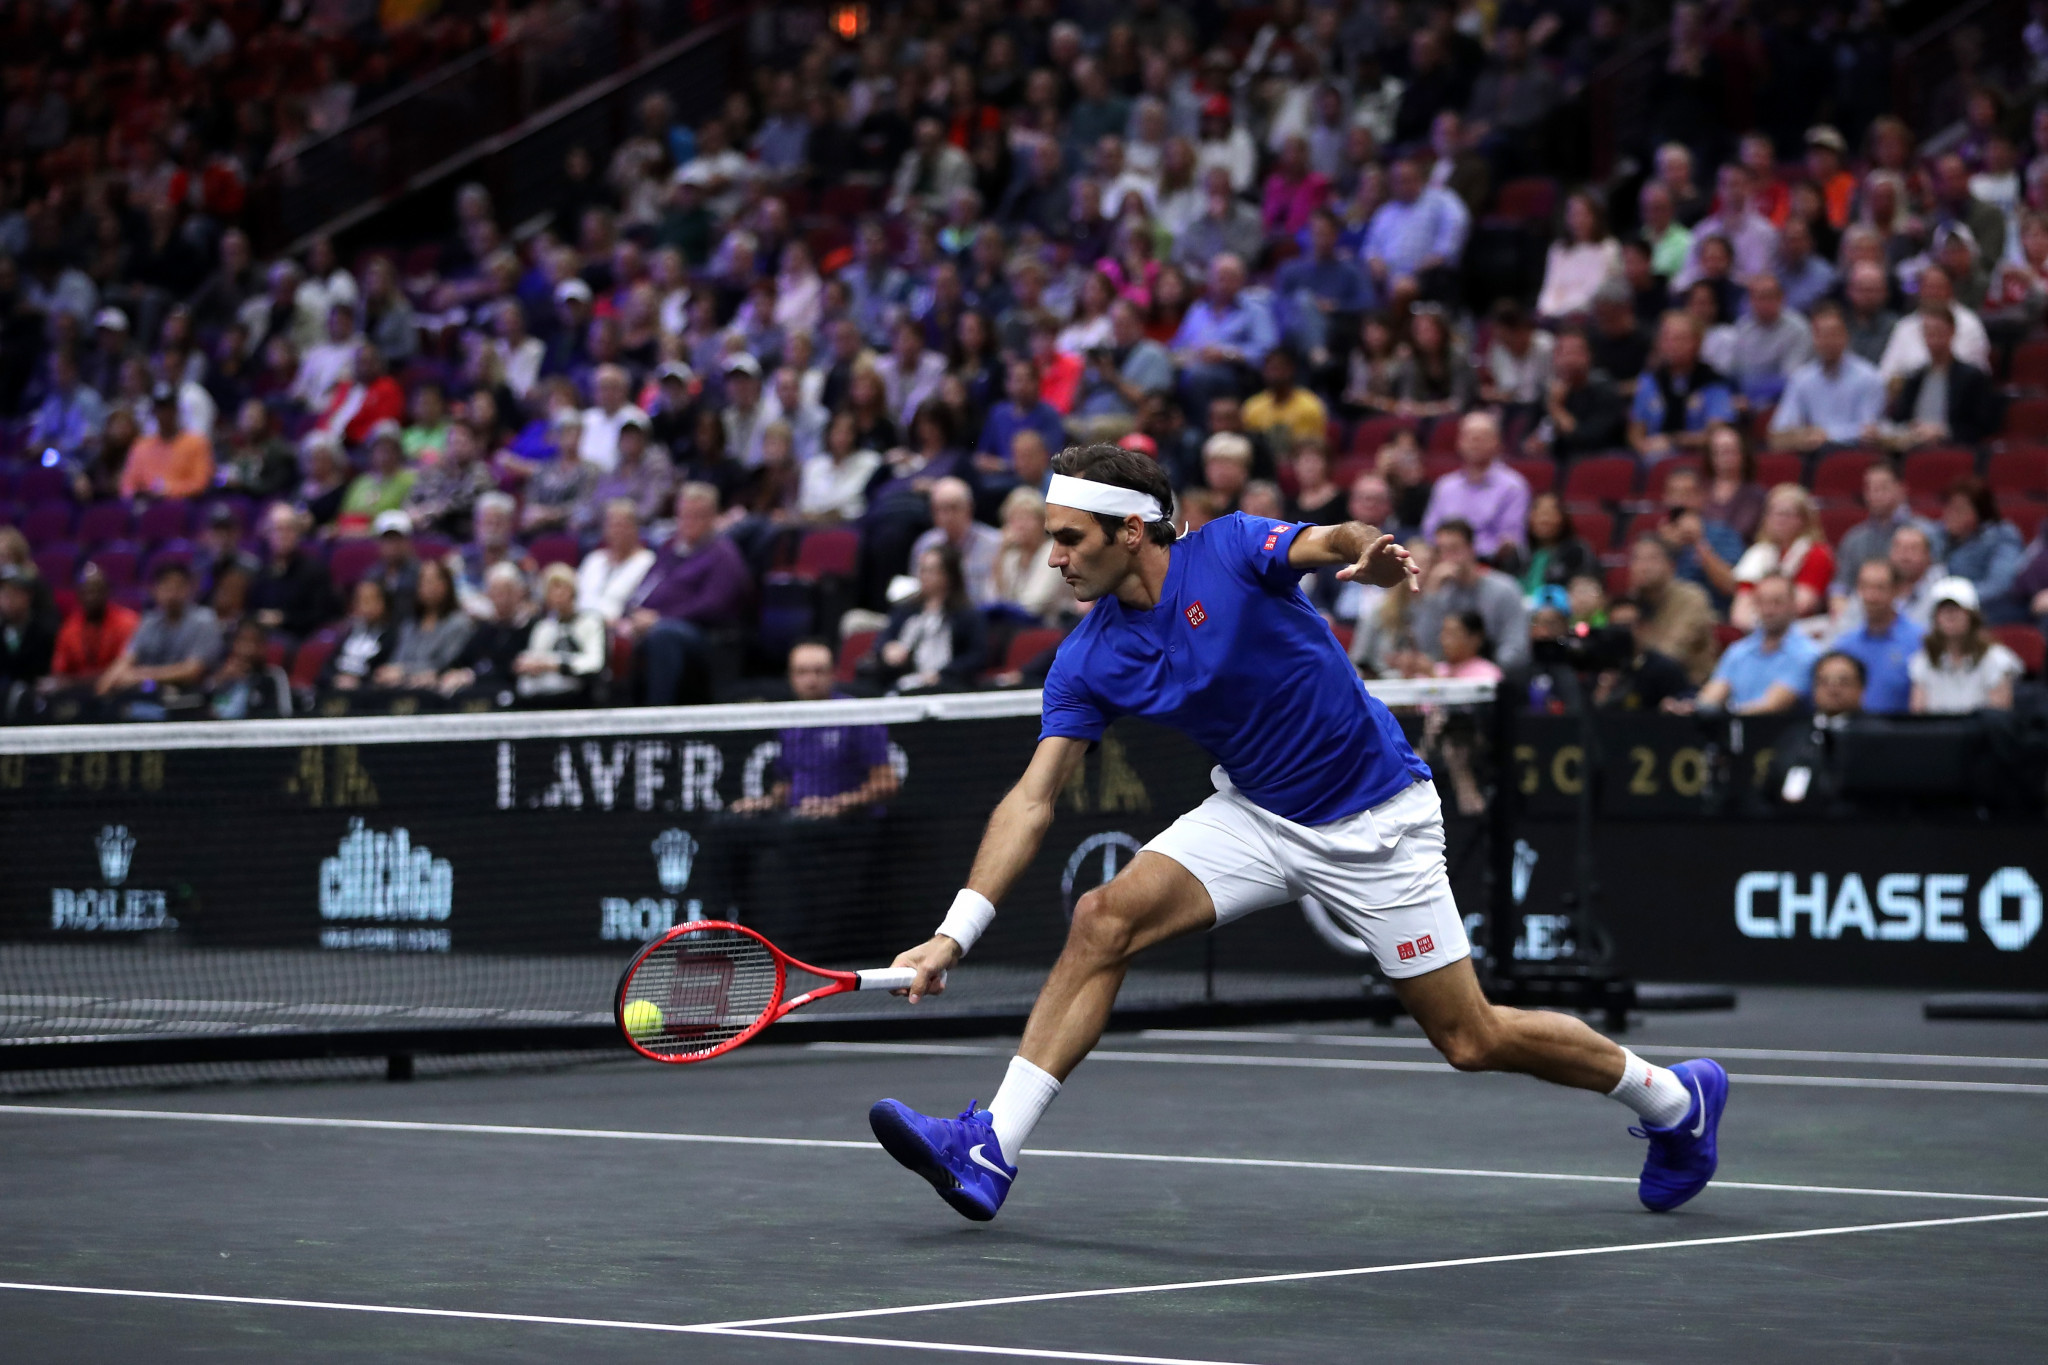 Switzerland's 20-time Grand Slam champion Roger Federer claimed a comfortable victory for Team Europe against Australia's Nick Kyrgios ©Getty Images